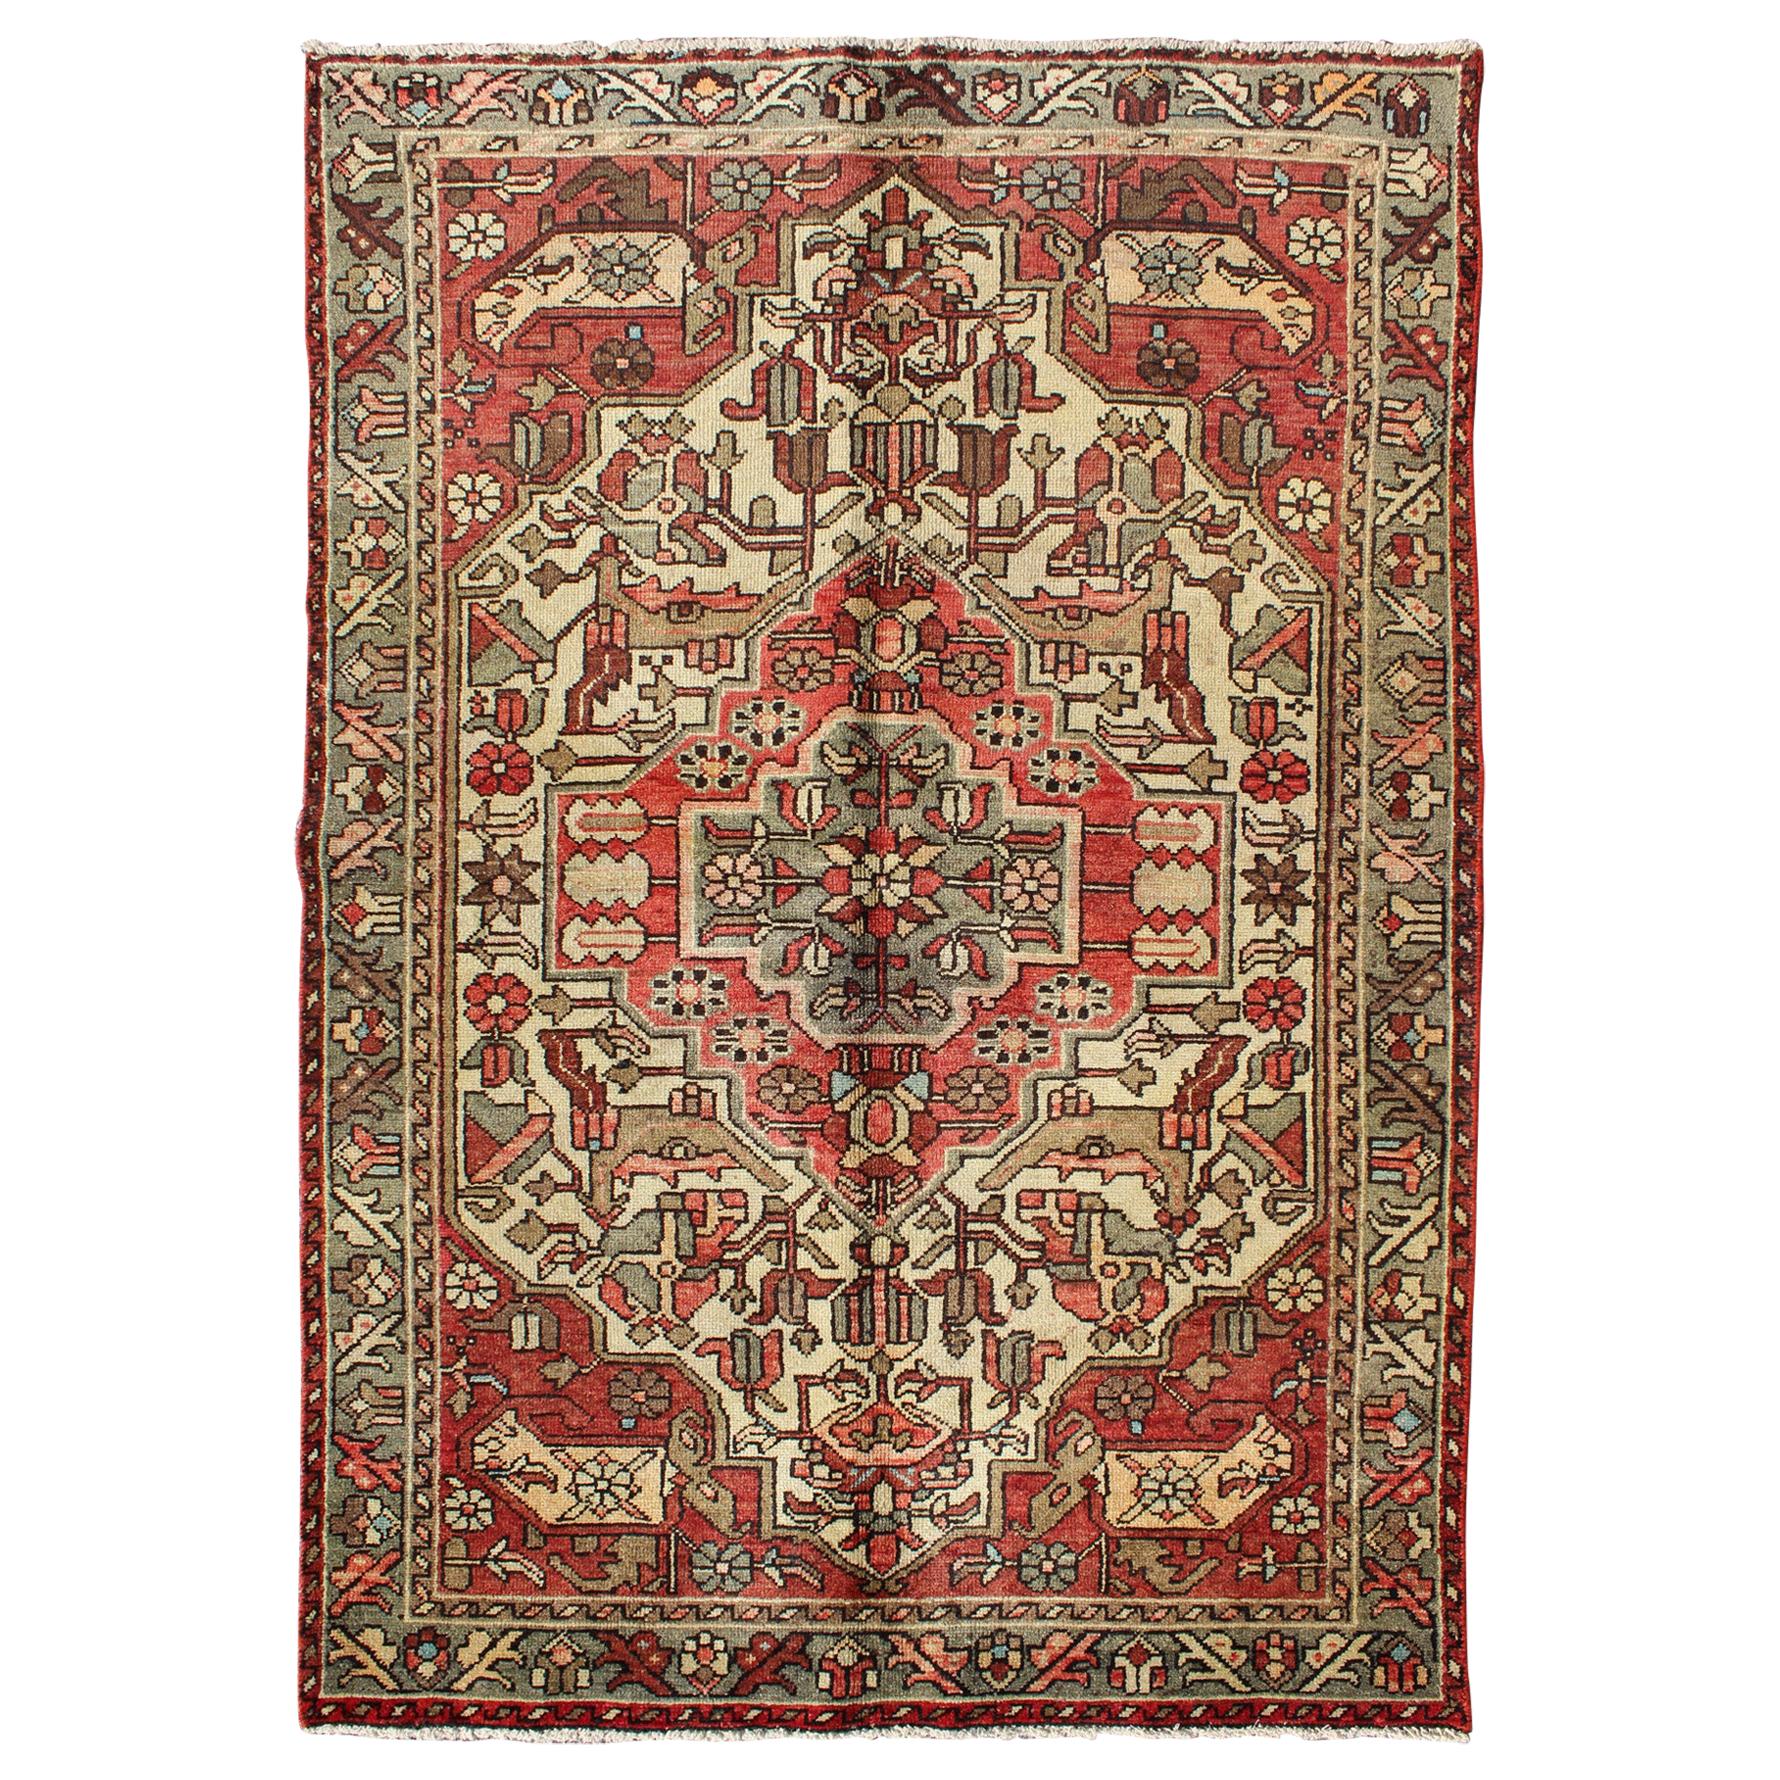 Outstanding Vintage Persian Lilihan Rug with Floral Geometric Medallion Design